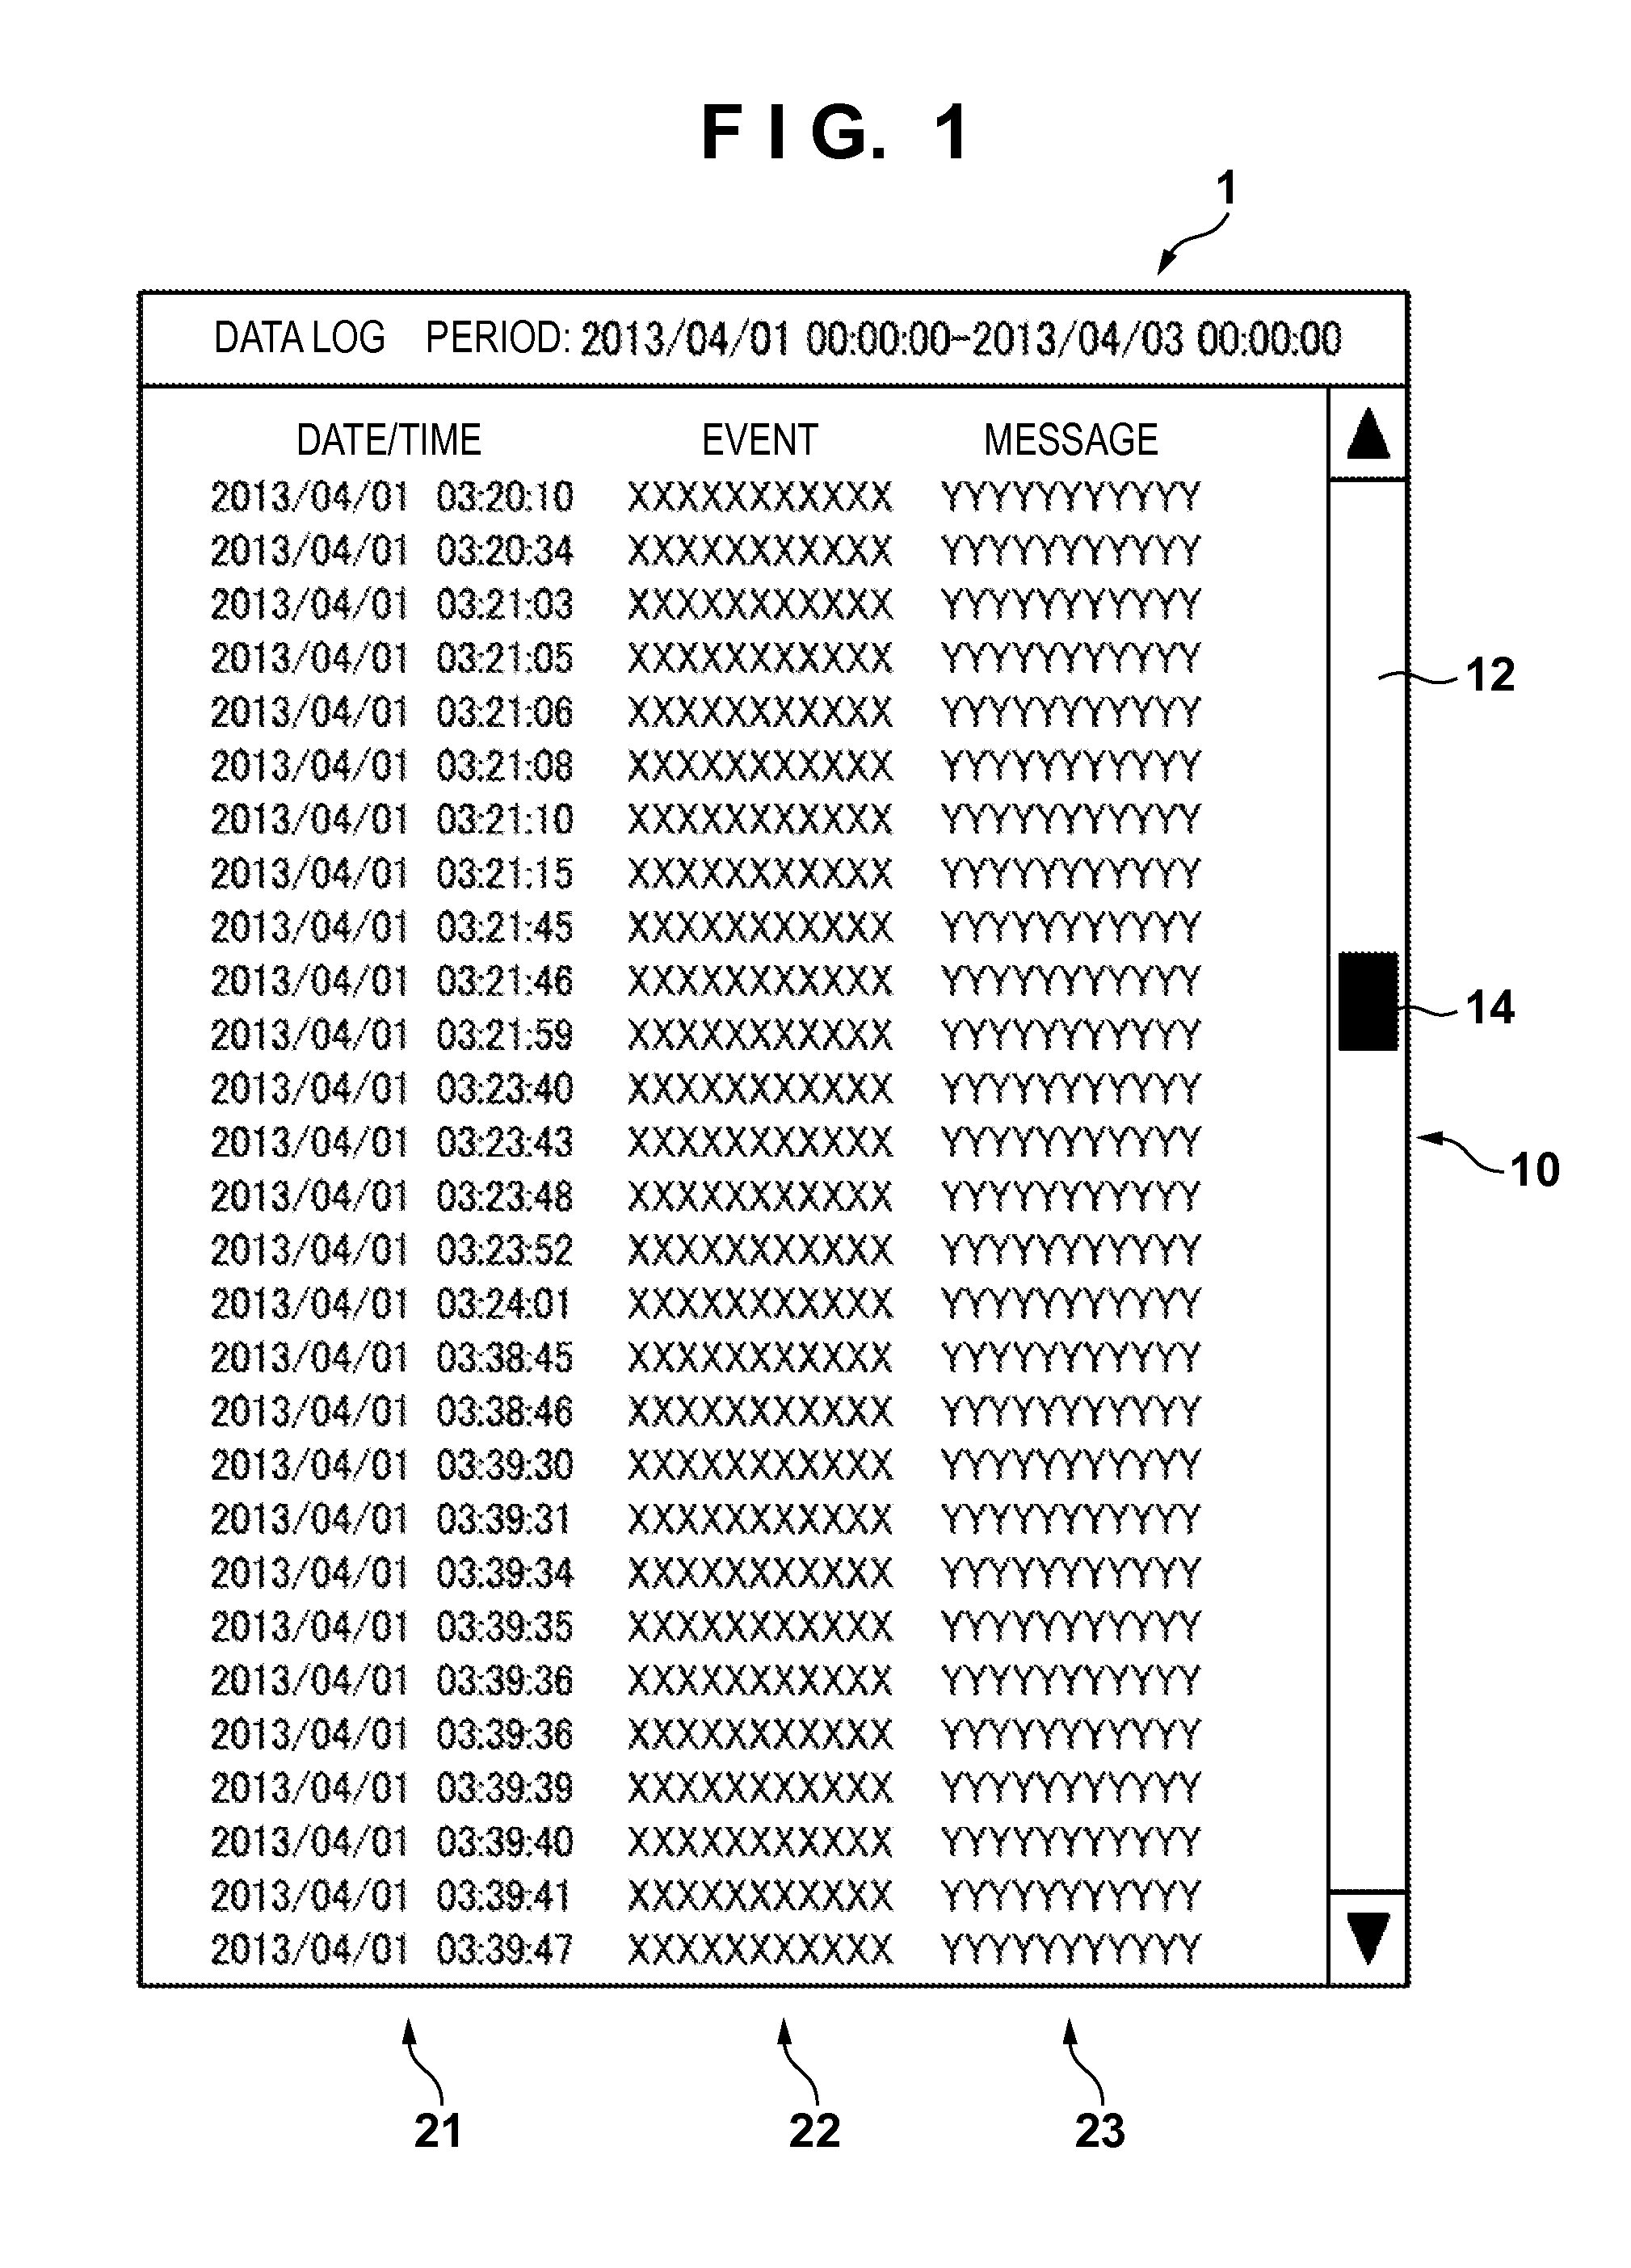 Information processing apparatus for processing plural event data generated by processing apparatus